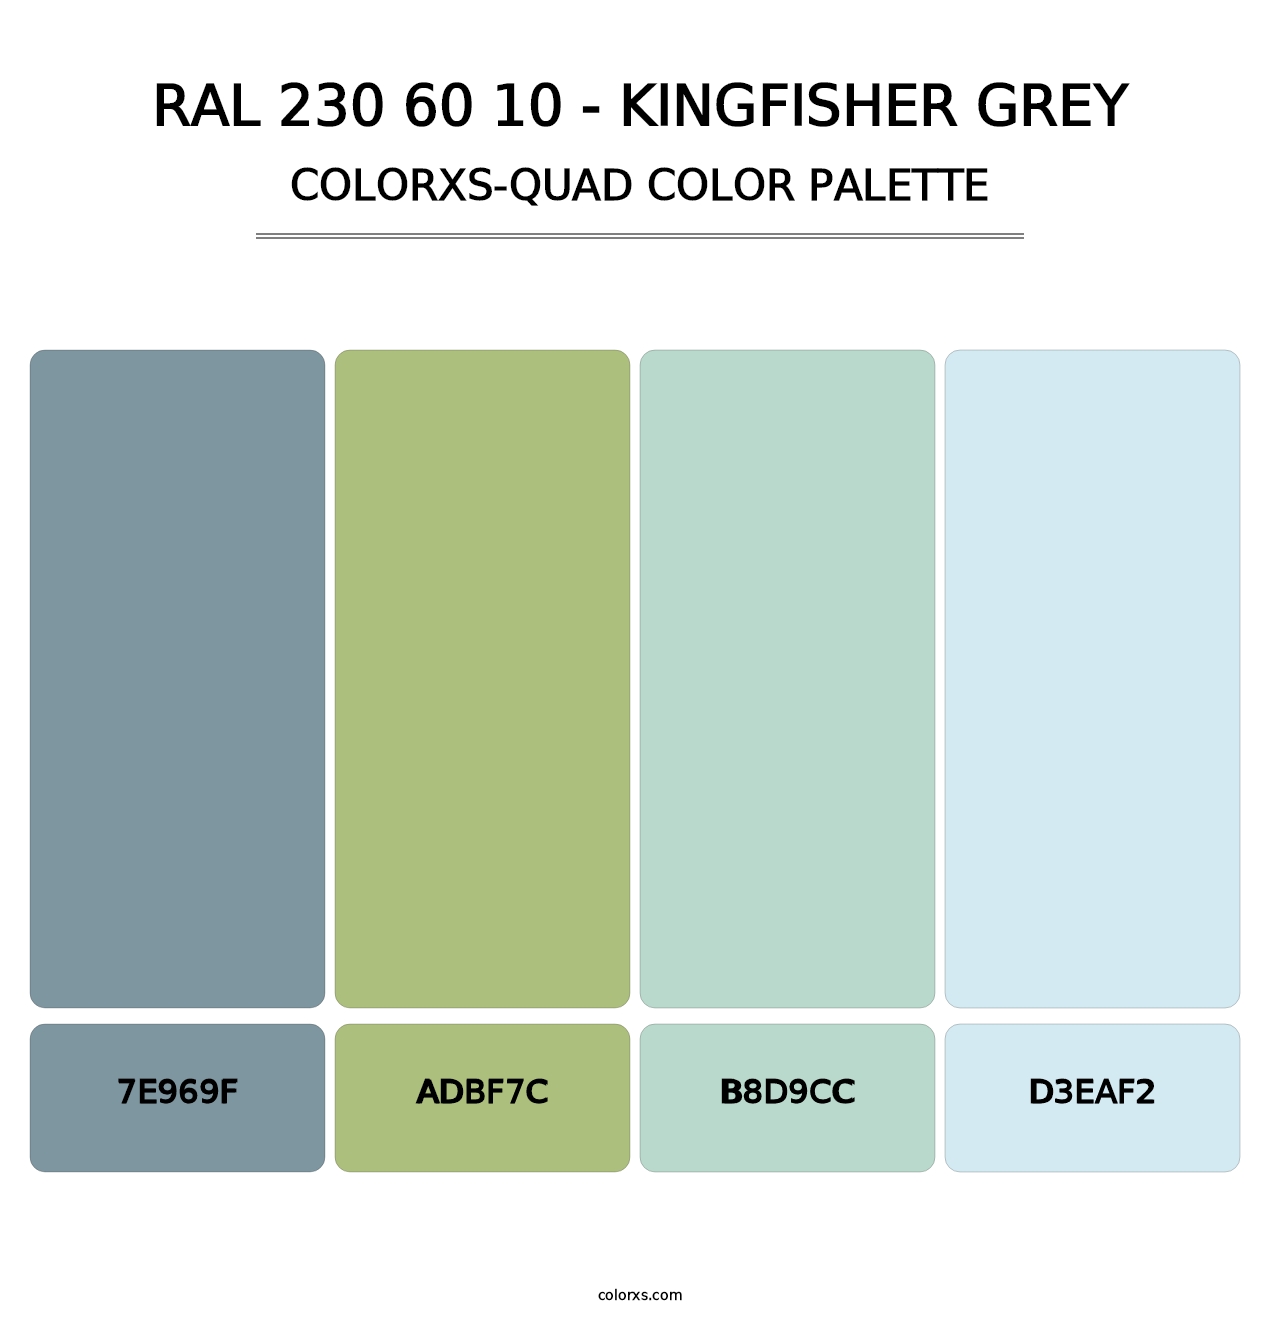 RAL 230 60 10 - Kingfisher Grey - Colorxs Quad Palette